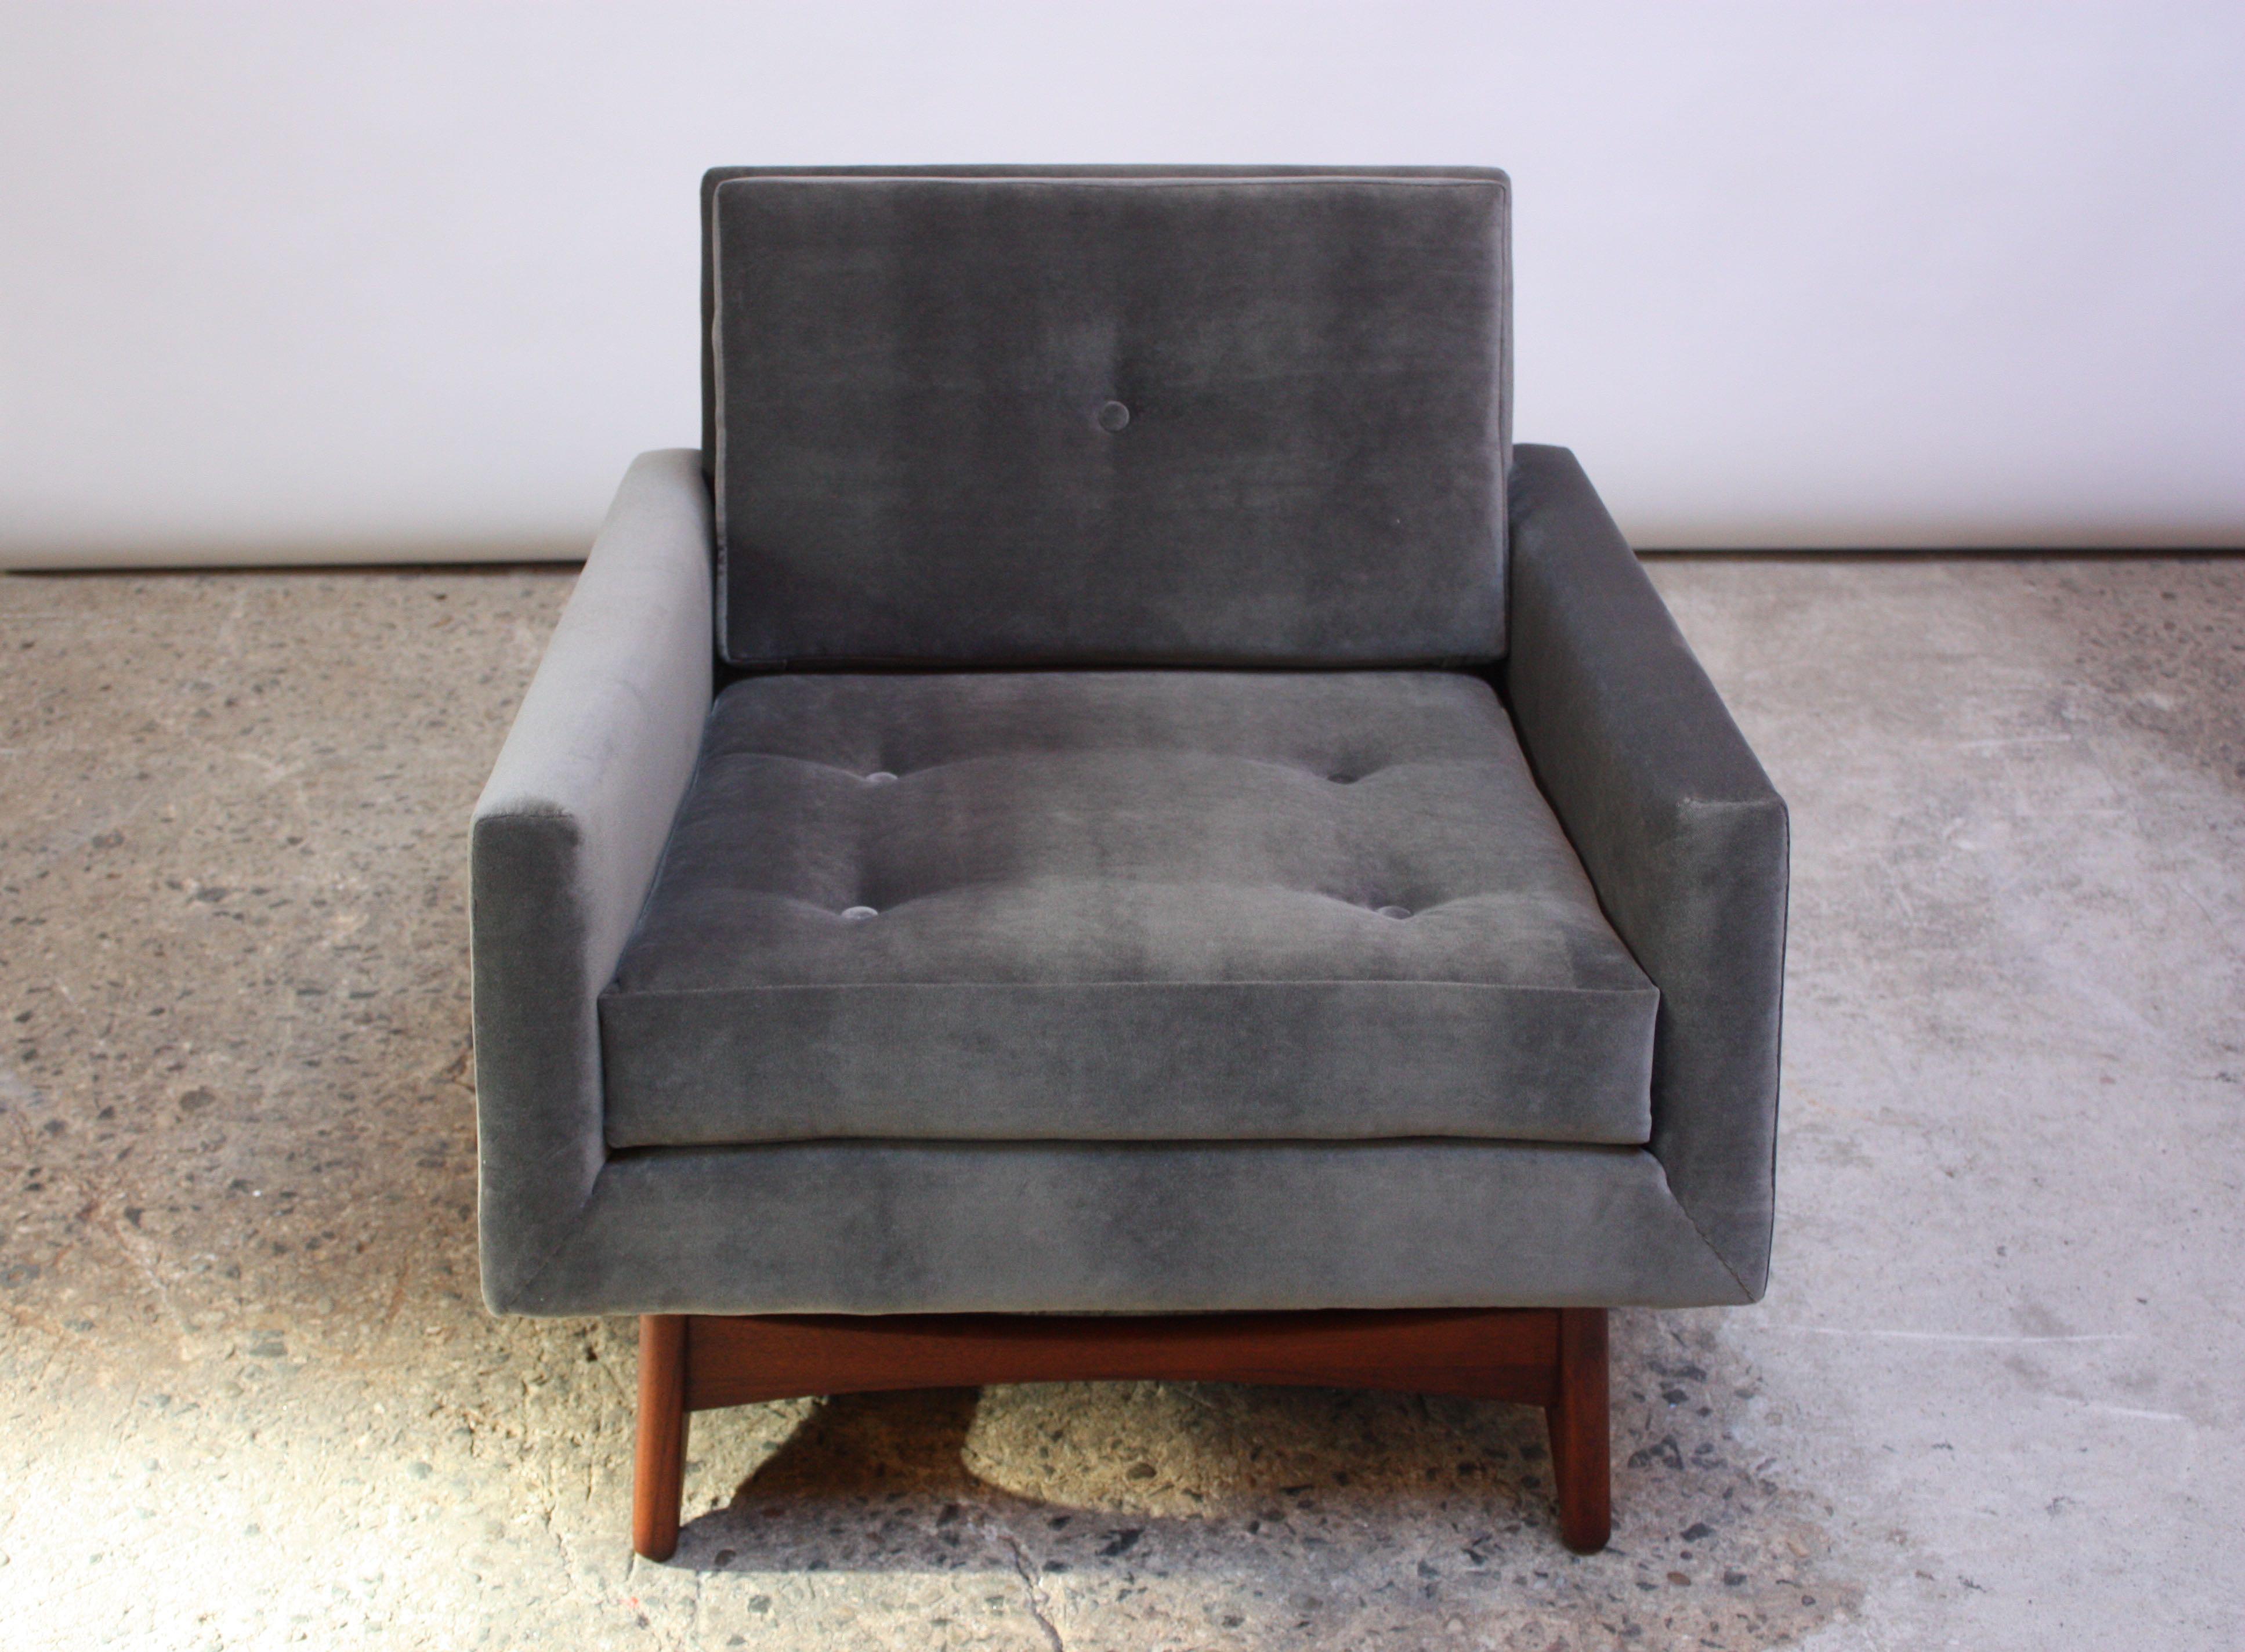 Model #2406-C club or lounge chair designed by Adrian Pearsall for Craft Associates in the 1960s. Composed of a sculpted walnut base which supports the frame. The back cushion features a single button, and the seat is fully tufted and buttoned.